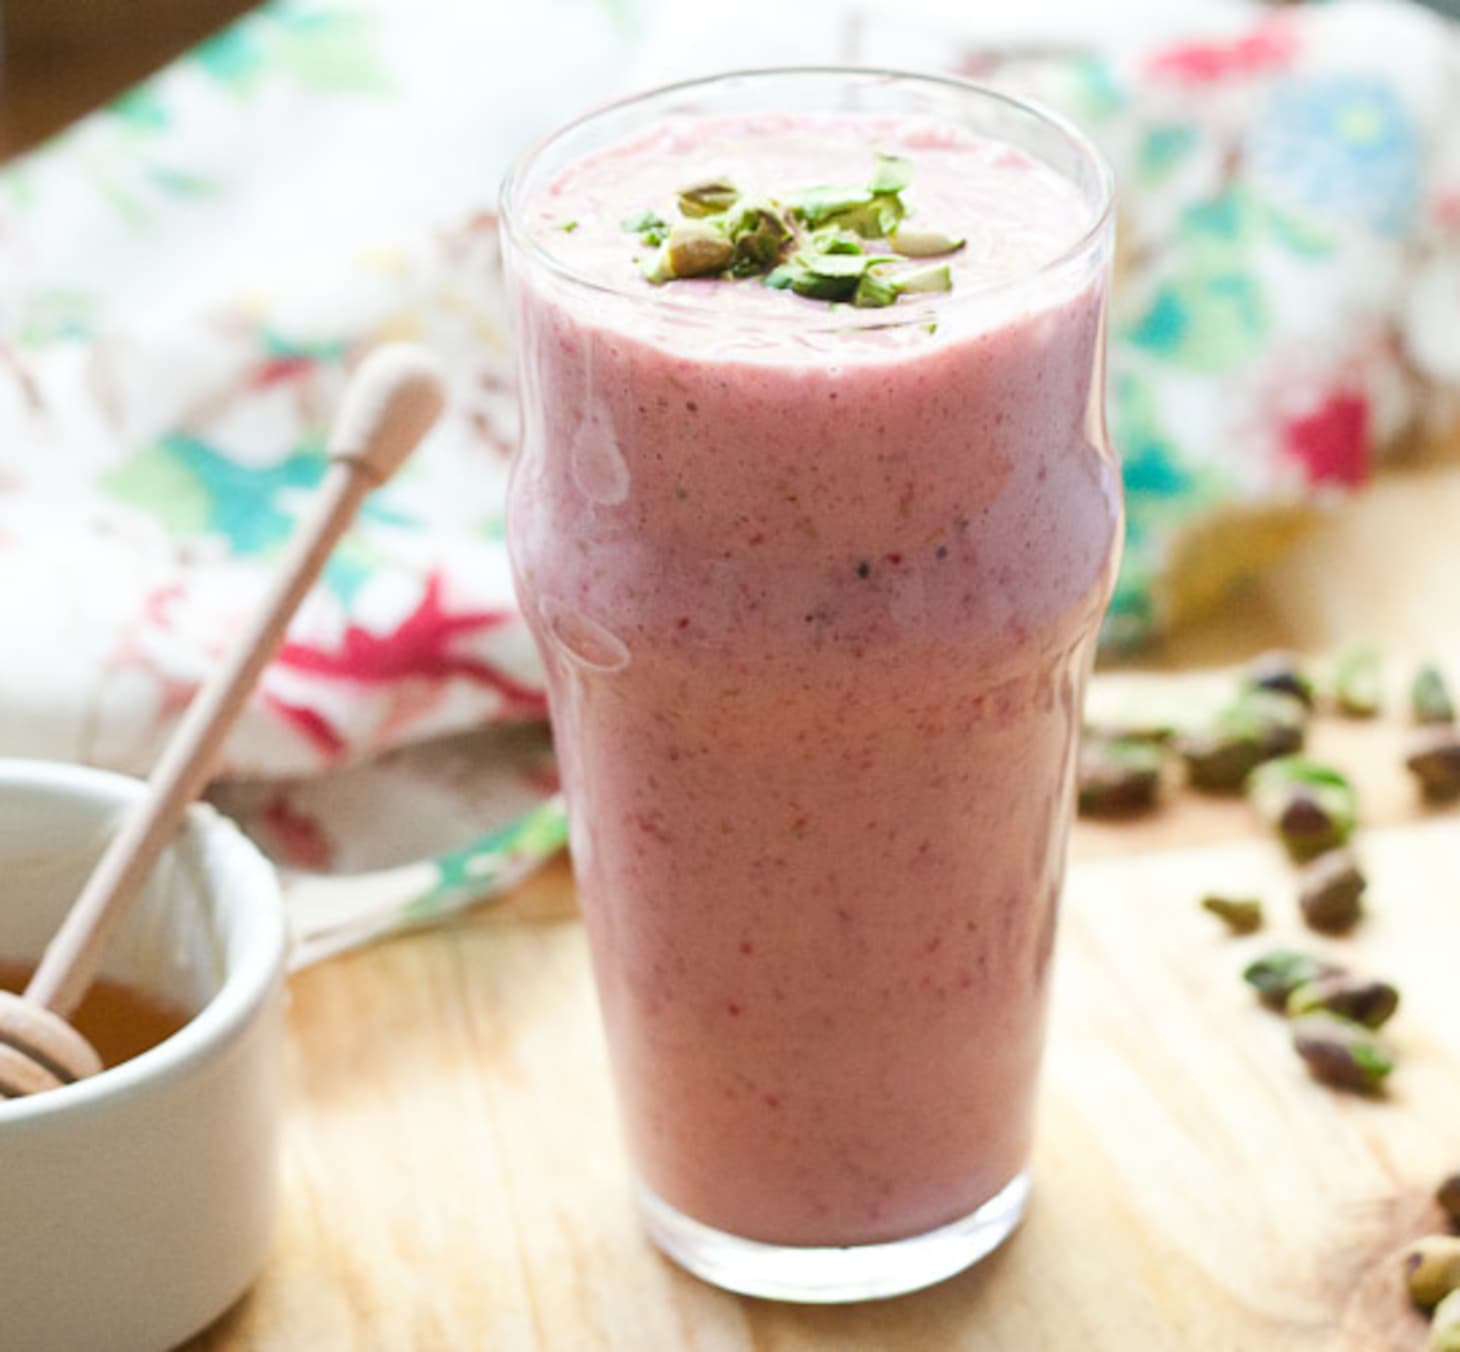 The Best Way to Make Big Batches of Smoothies Ahead of Time